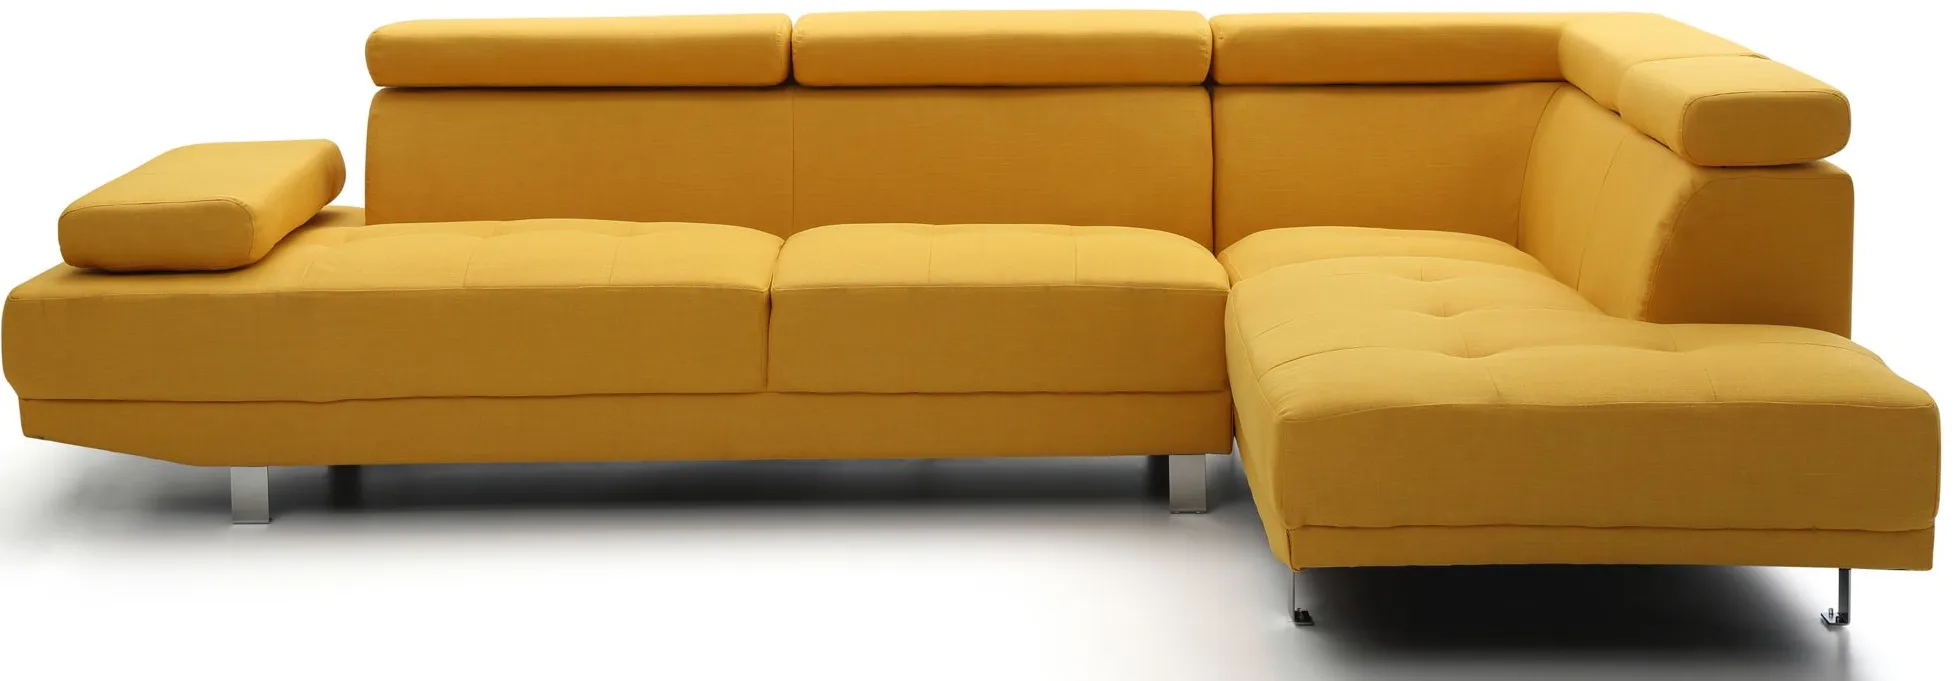 Riveredge 2-pc. Sectional Sofa in Yellow by Glory Furniture